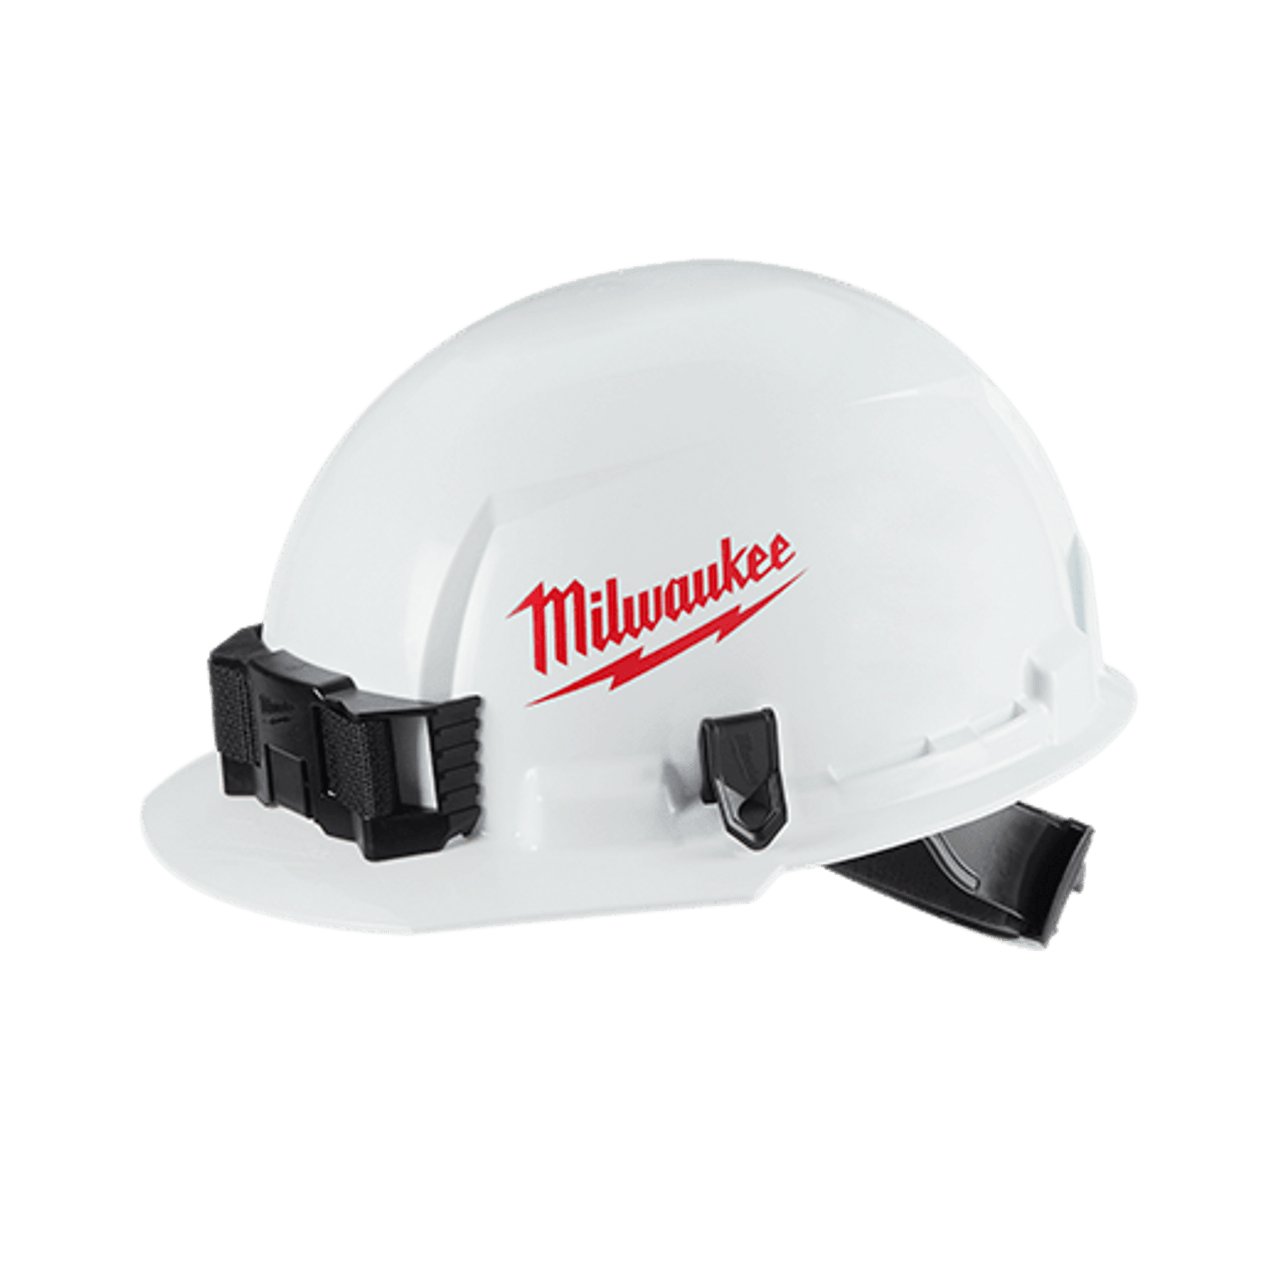 Front Brim Hard Hat with BOLT™ Accessories – Type 1 Class E